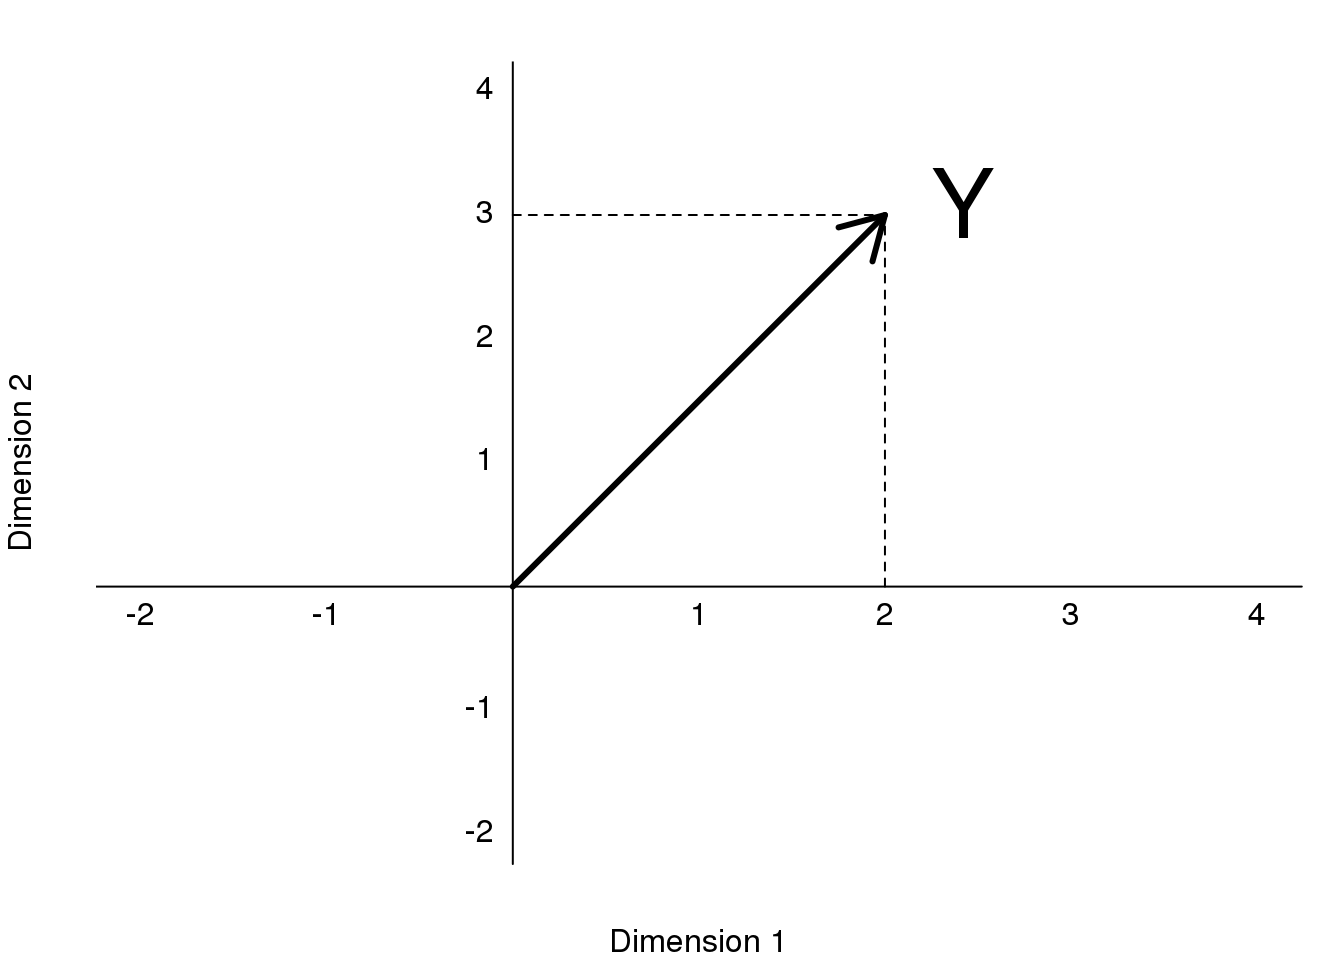 Plot of (2,3) as coordinates along Dimension 1 (1,0) and Dimension 2 (0,1).